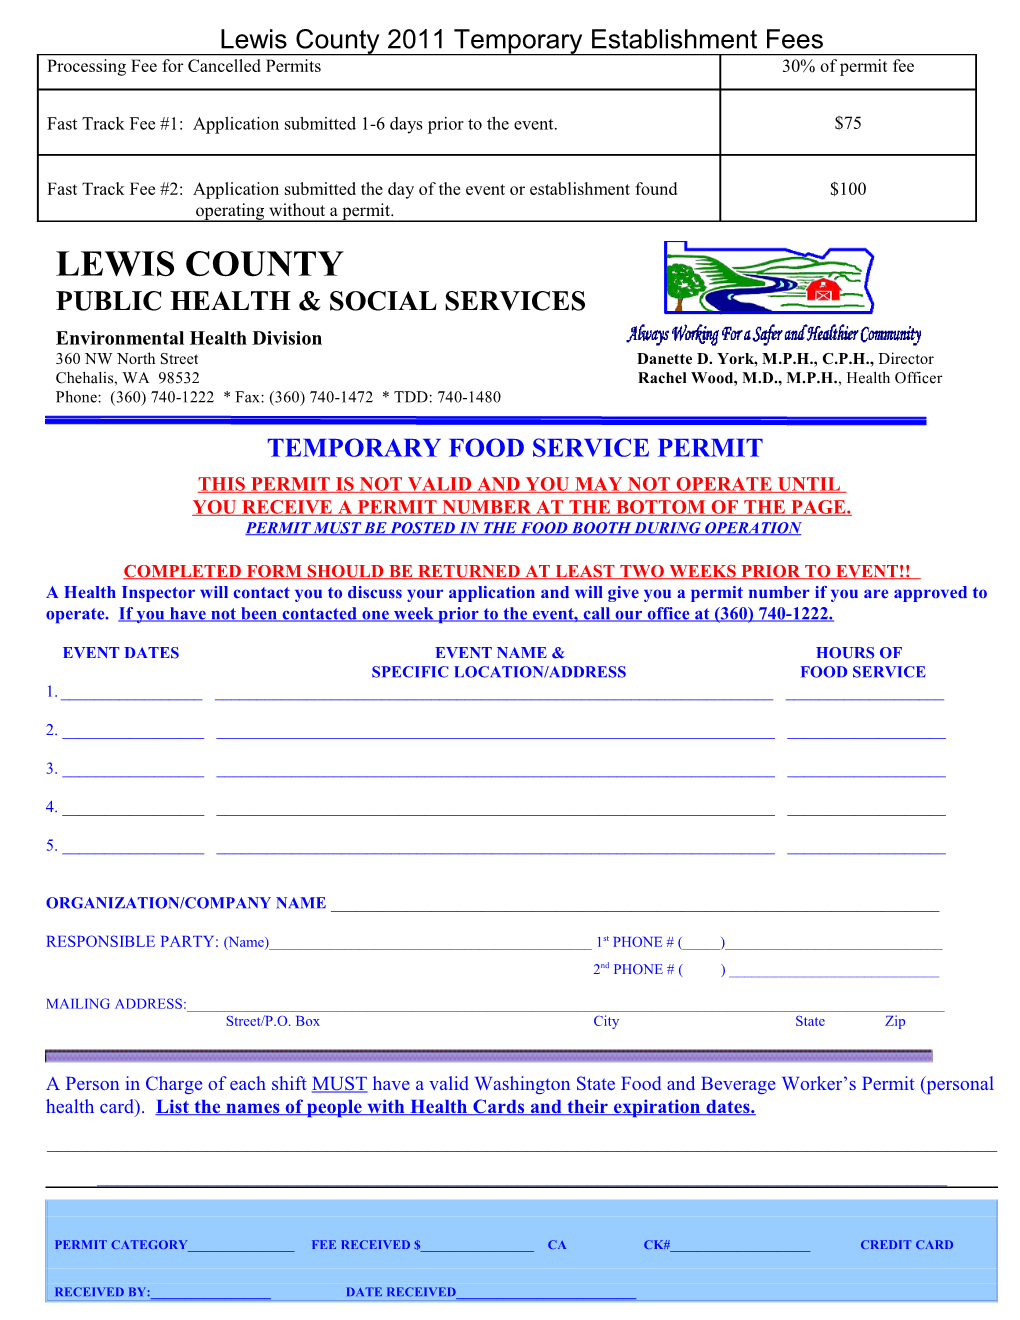 Lewis County Health & Social Services